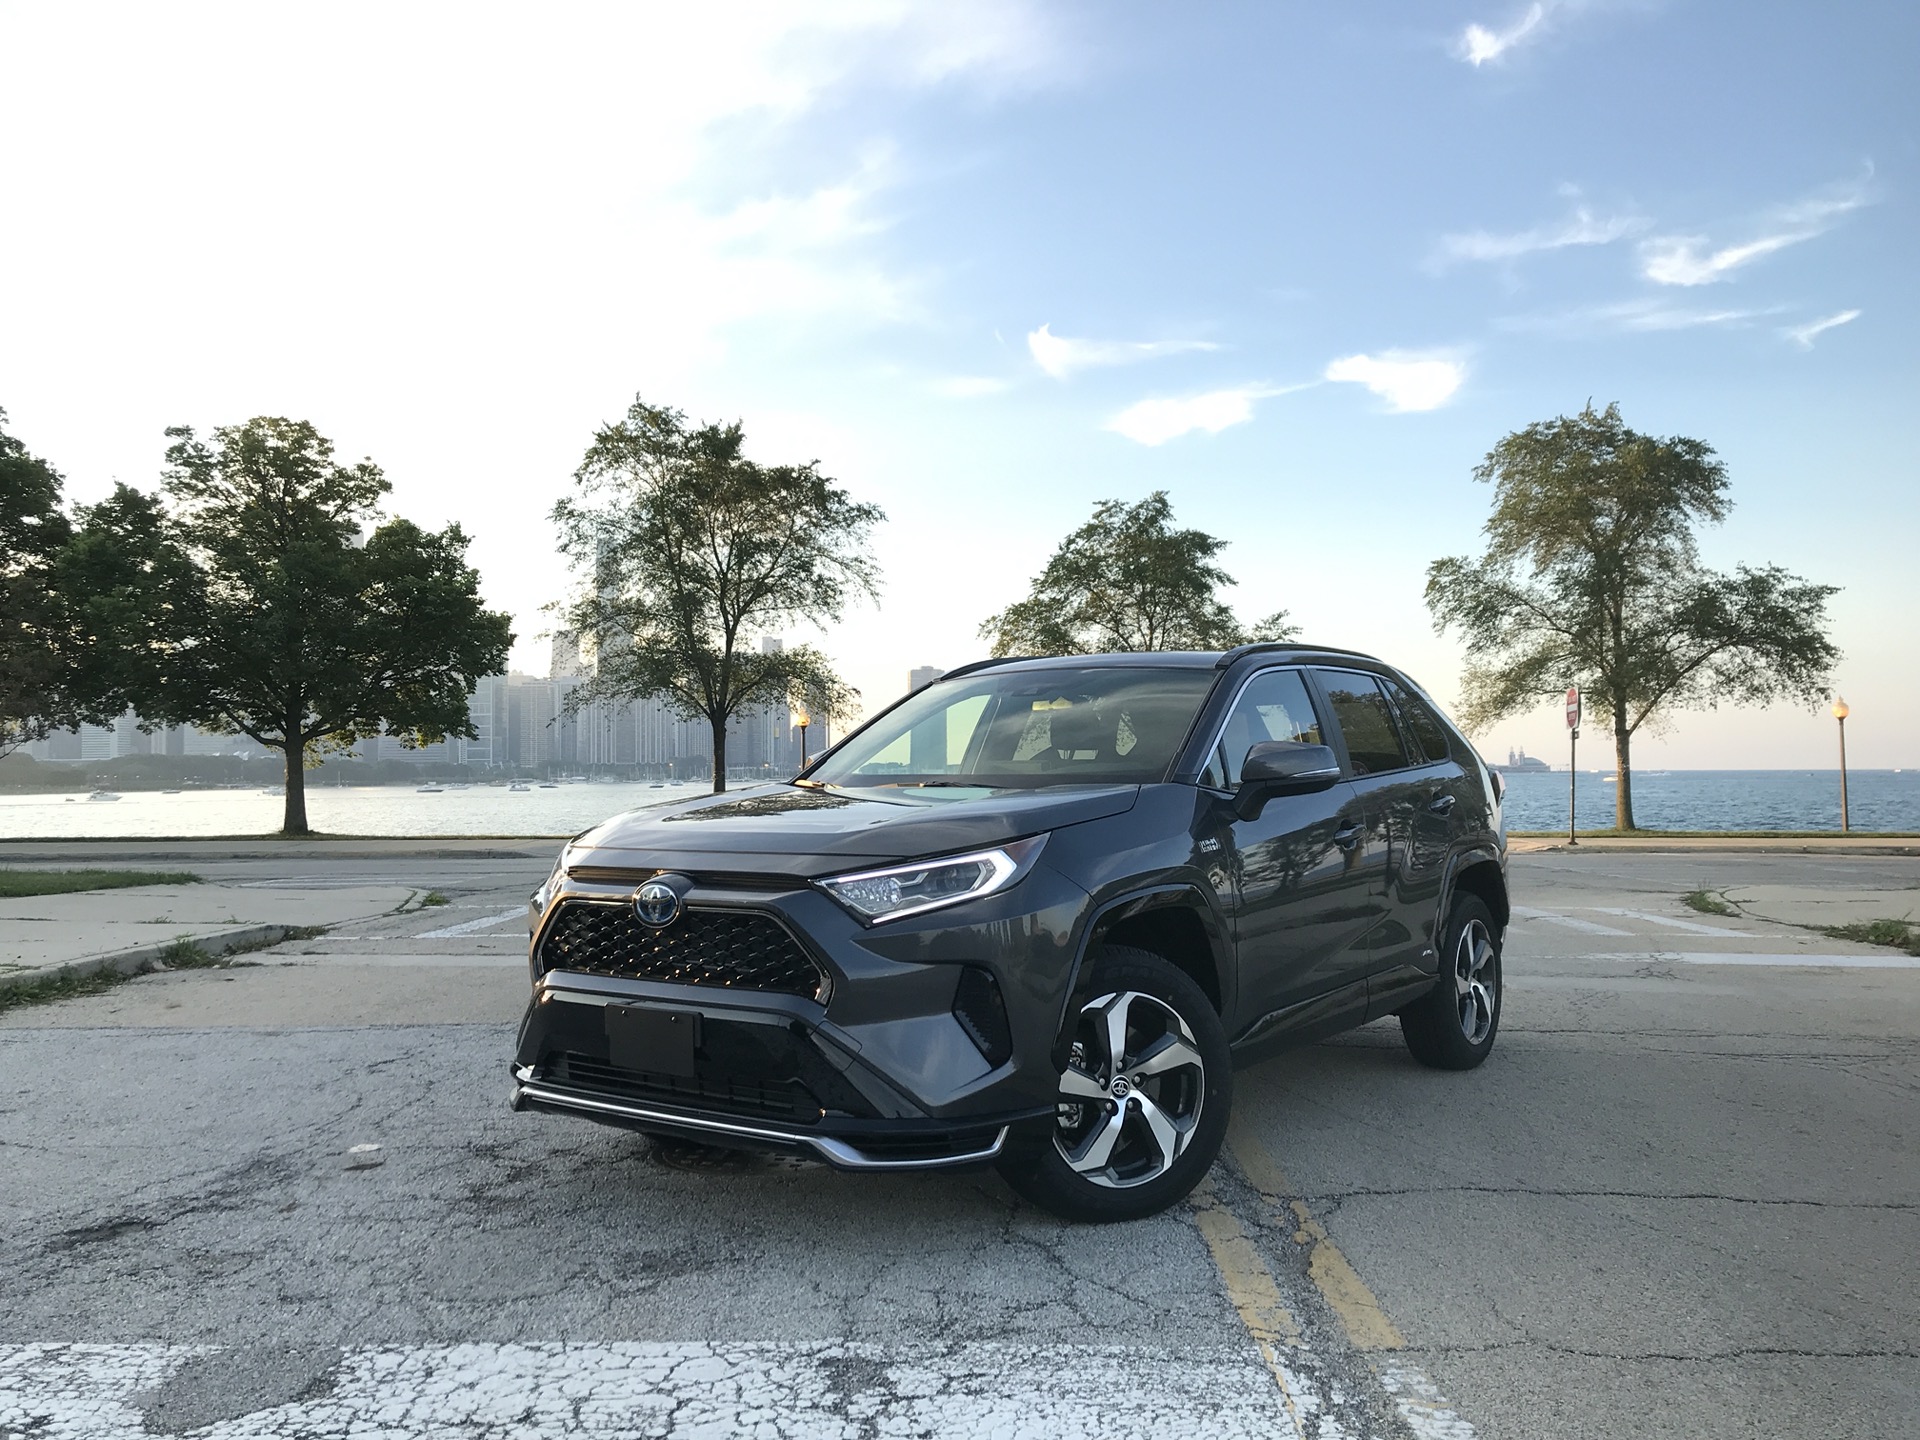 4 Fast Facts About The 2021 Toyota Rav4 Prime Plug In Hybrid Maizdemar